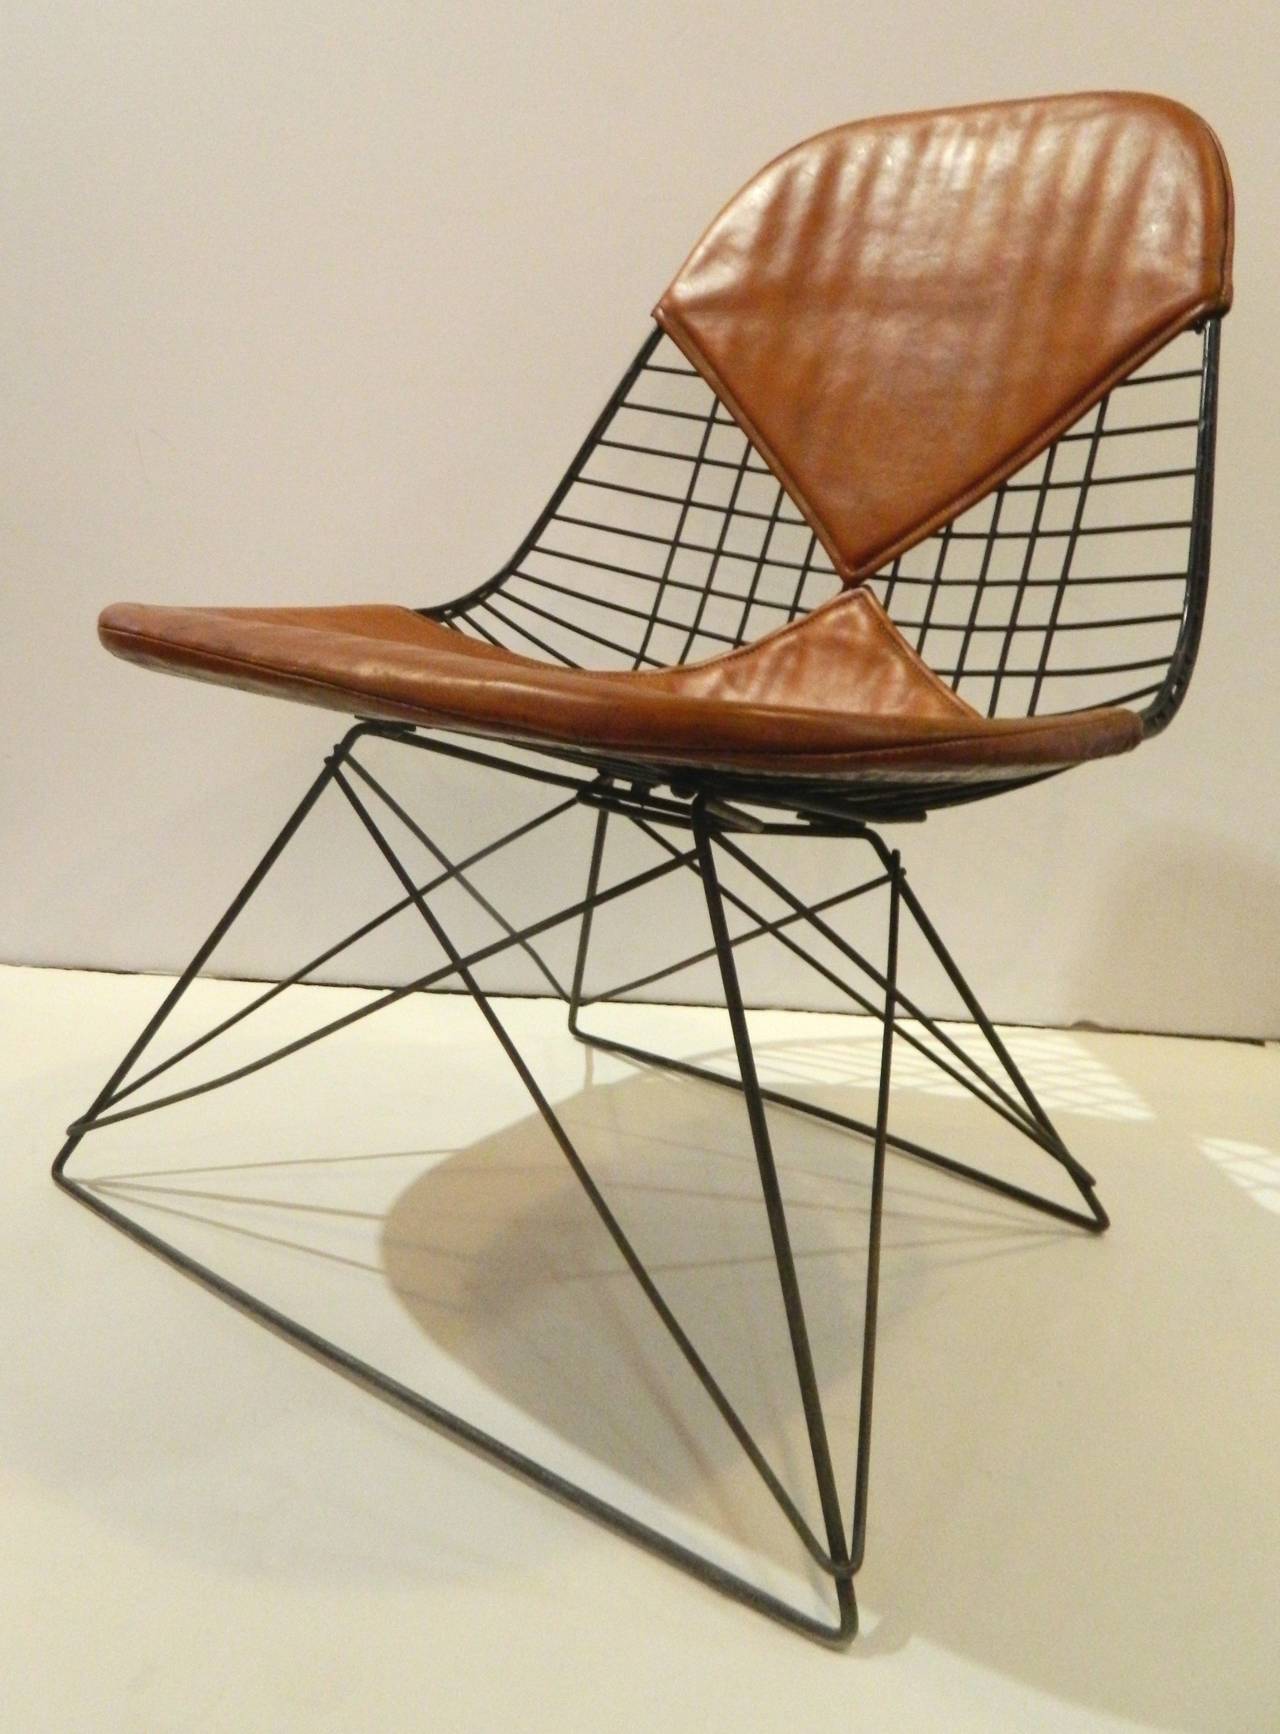 Eames LKR-2 wire chair with cat's cradle base and original upholstery. The jute backing on the seat pad dates the chair from between 1951 and 1957.
Two piece seat with original label. One 1